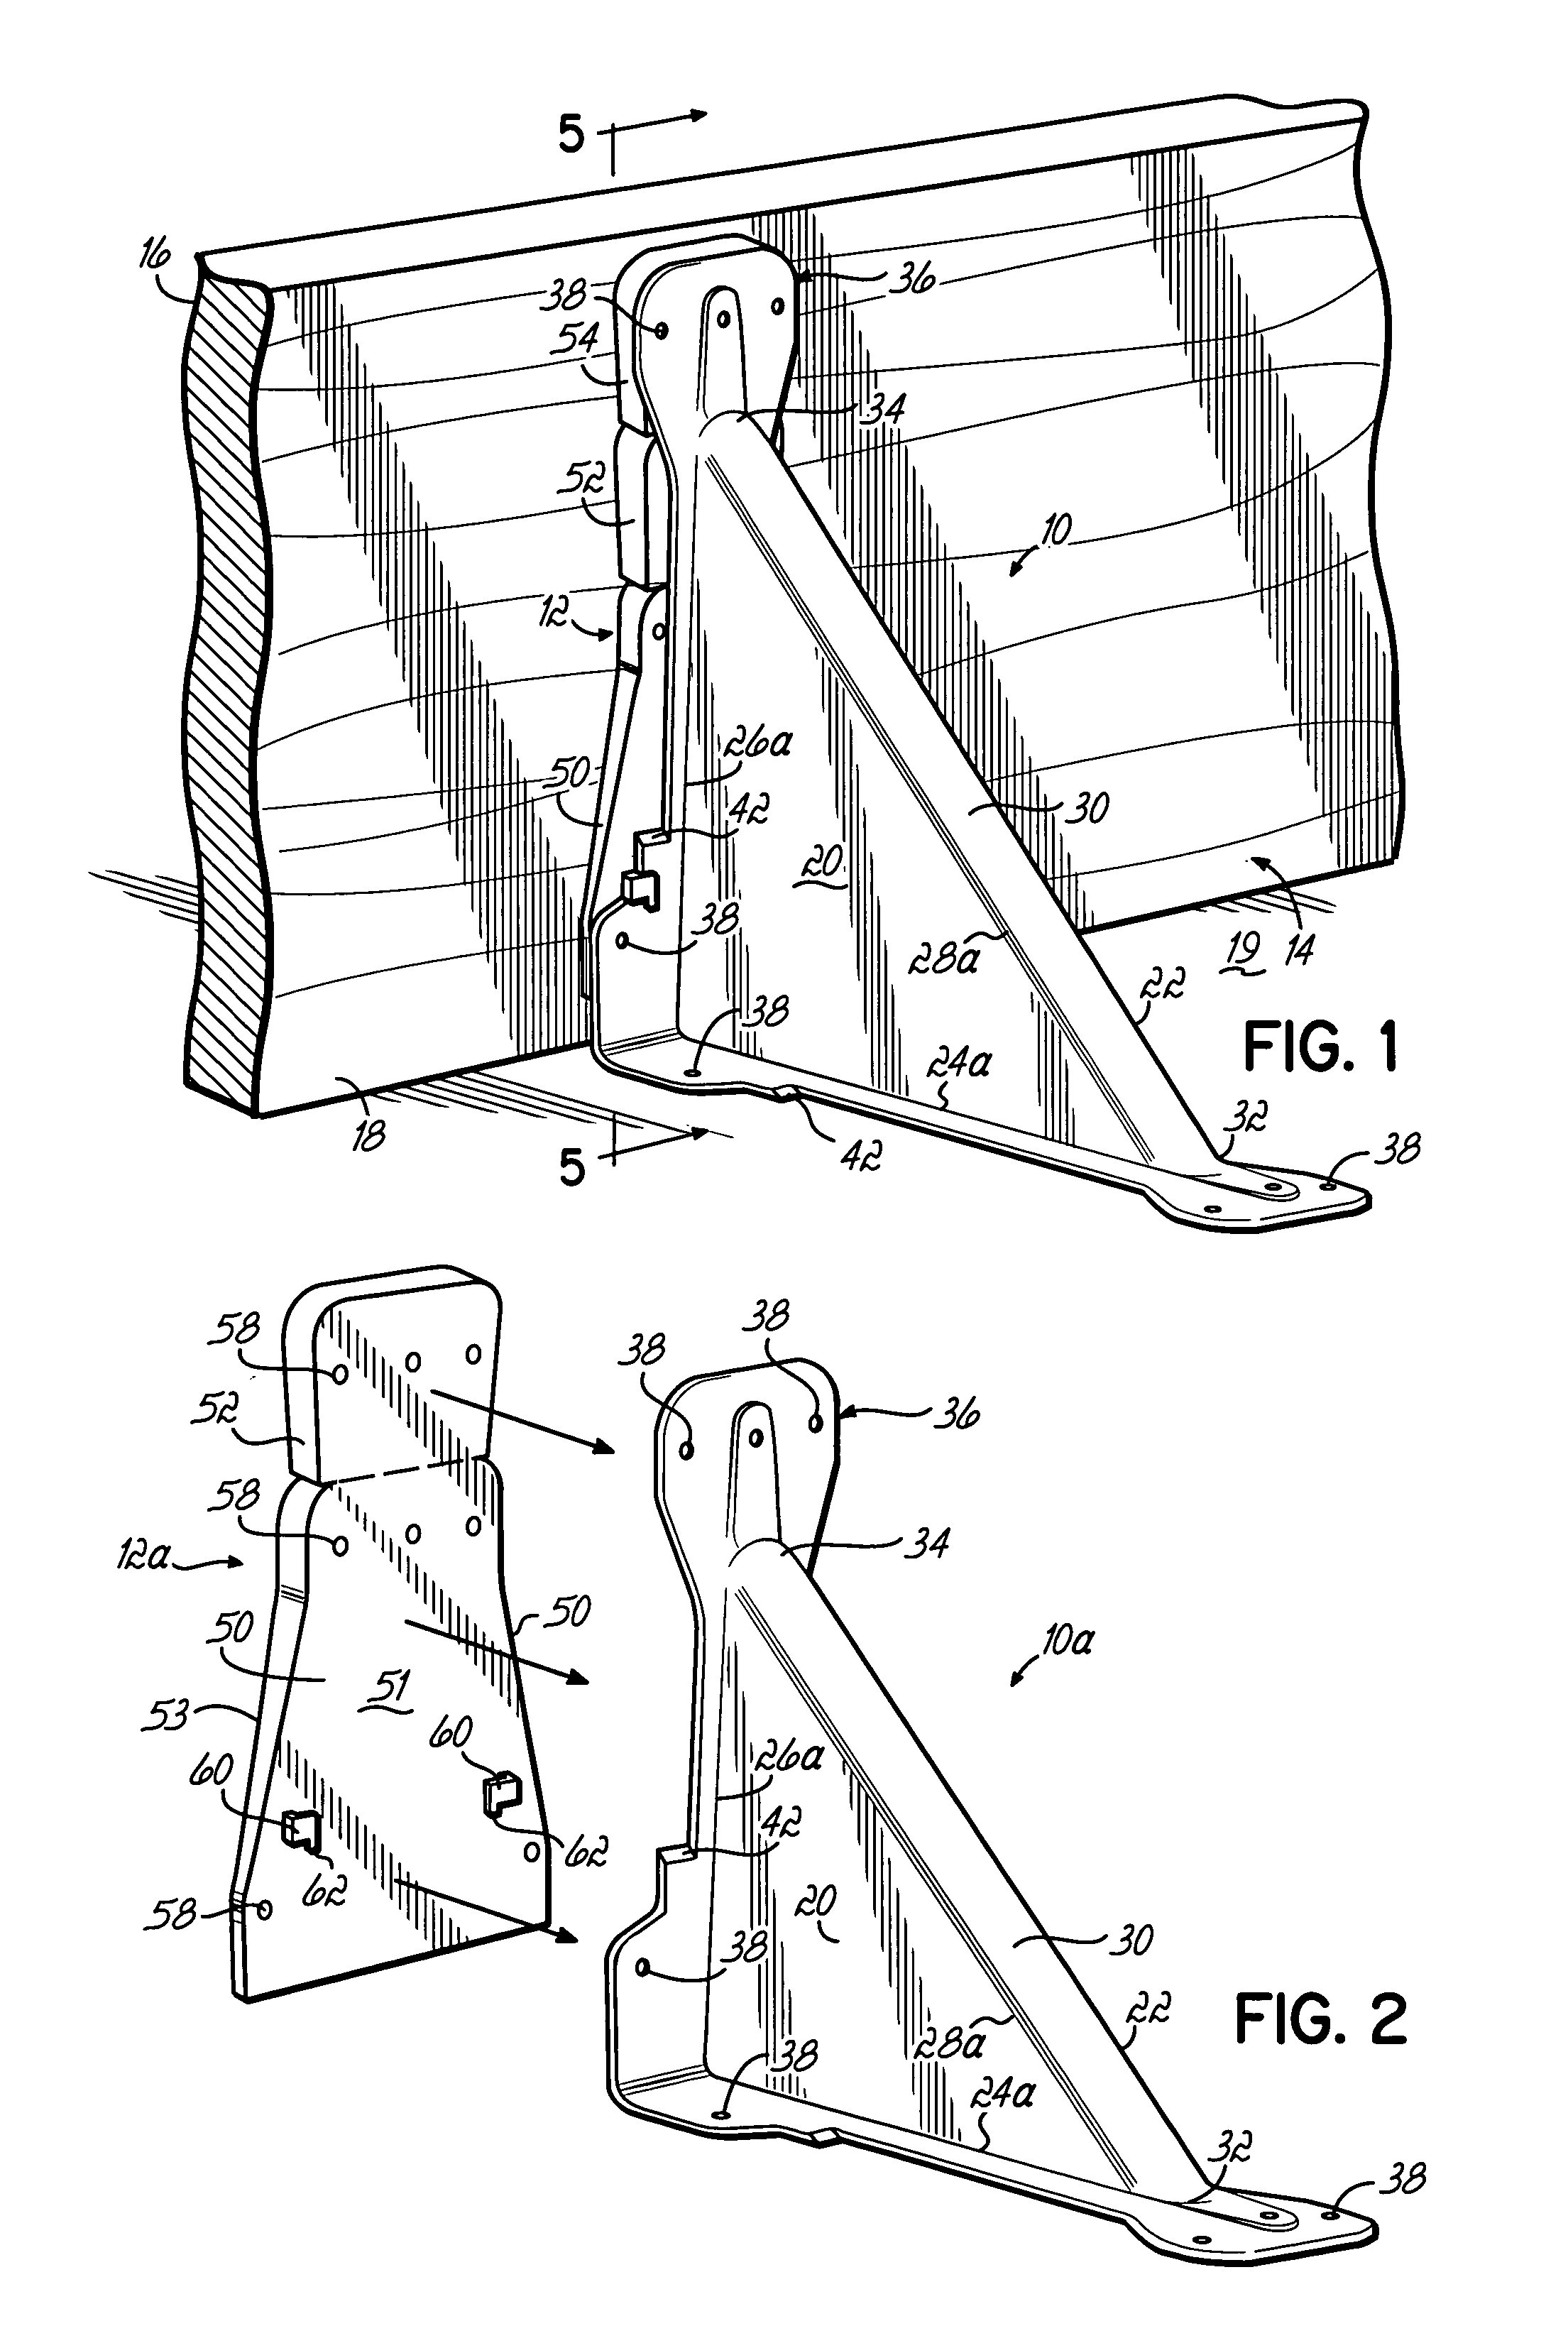 Concrete form brace and battering wedge